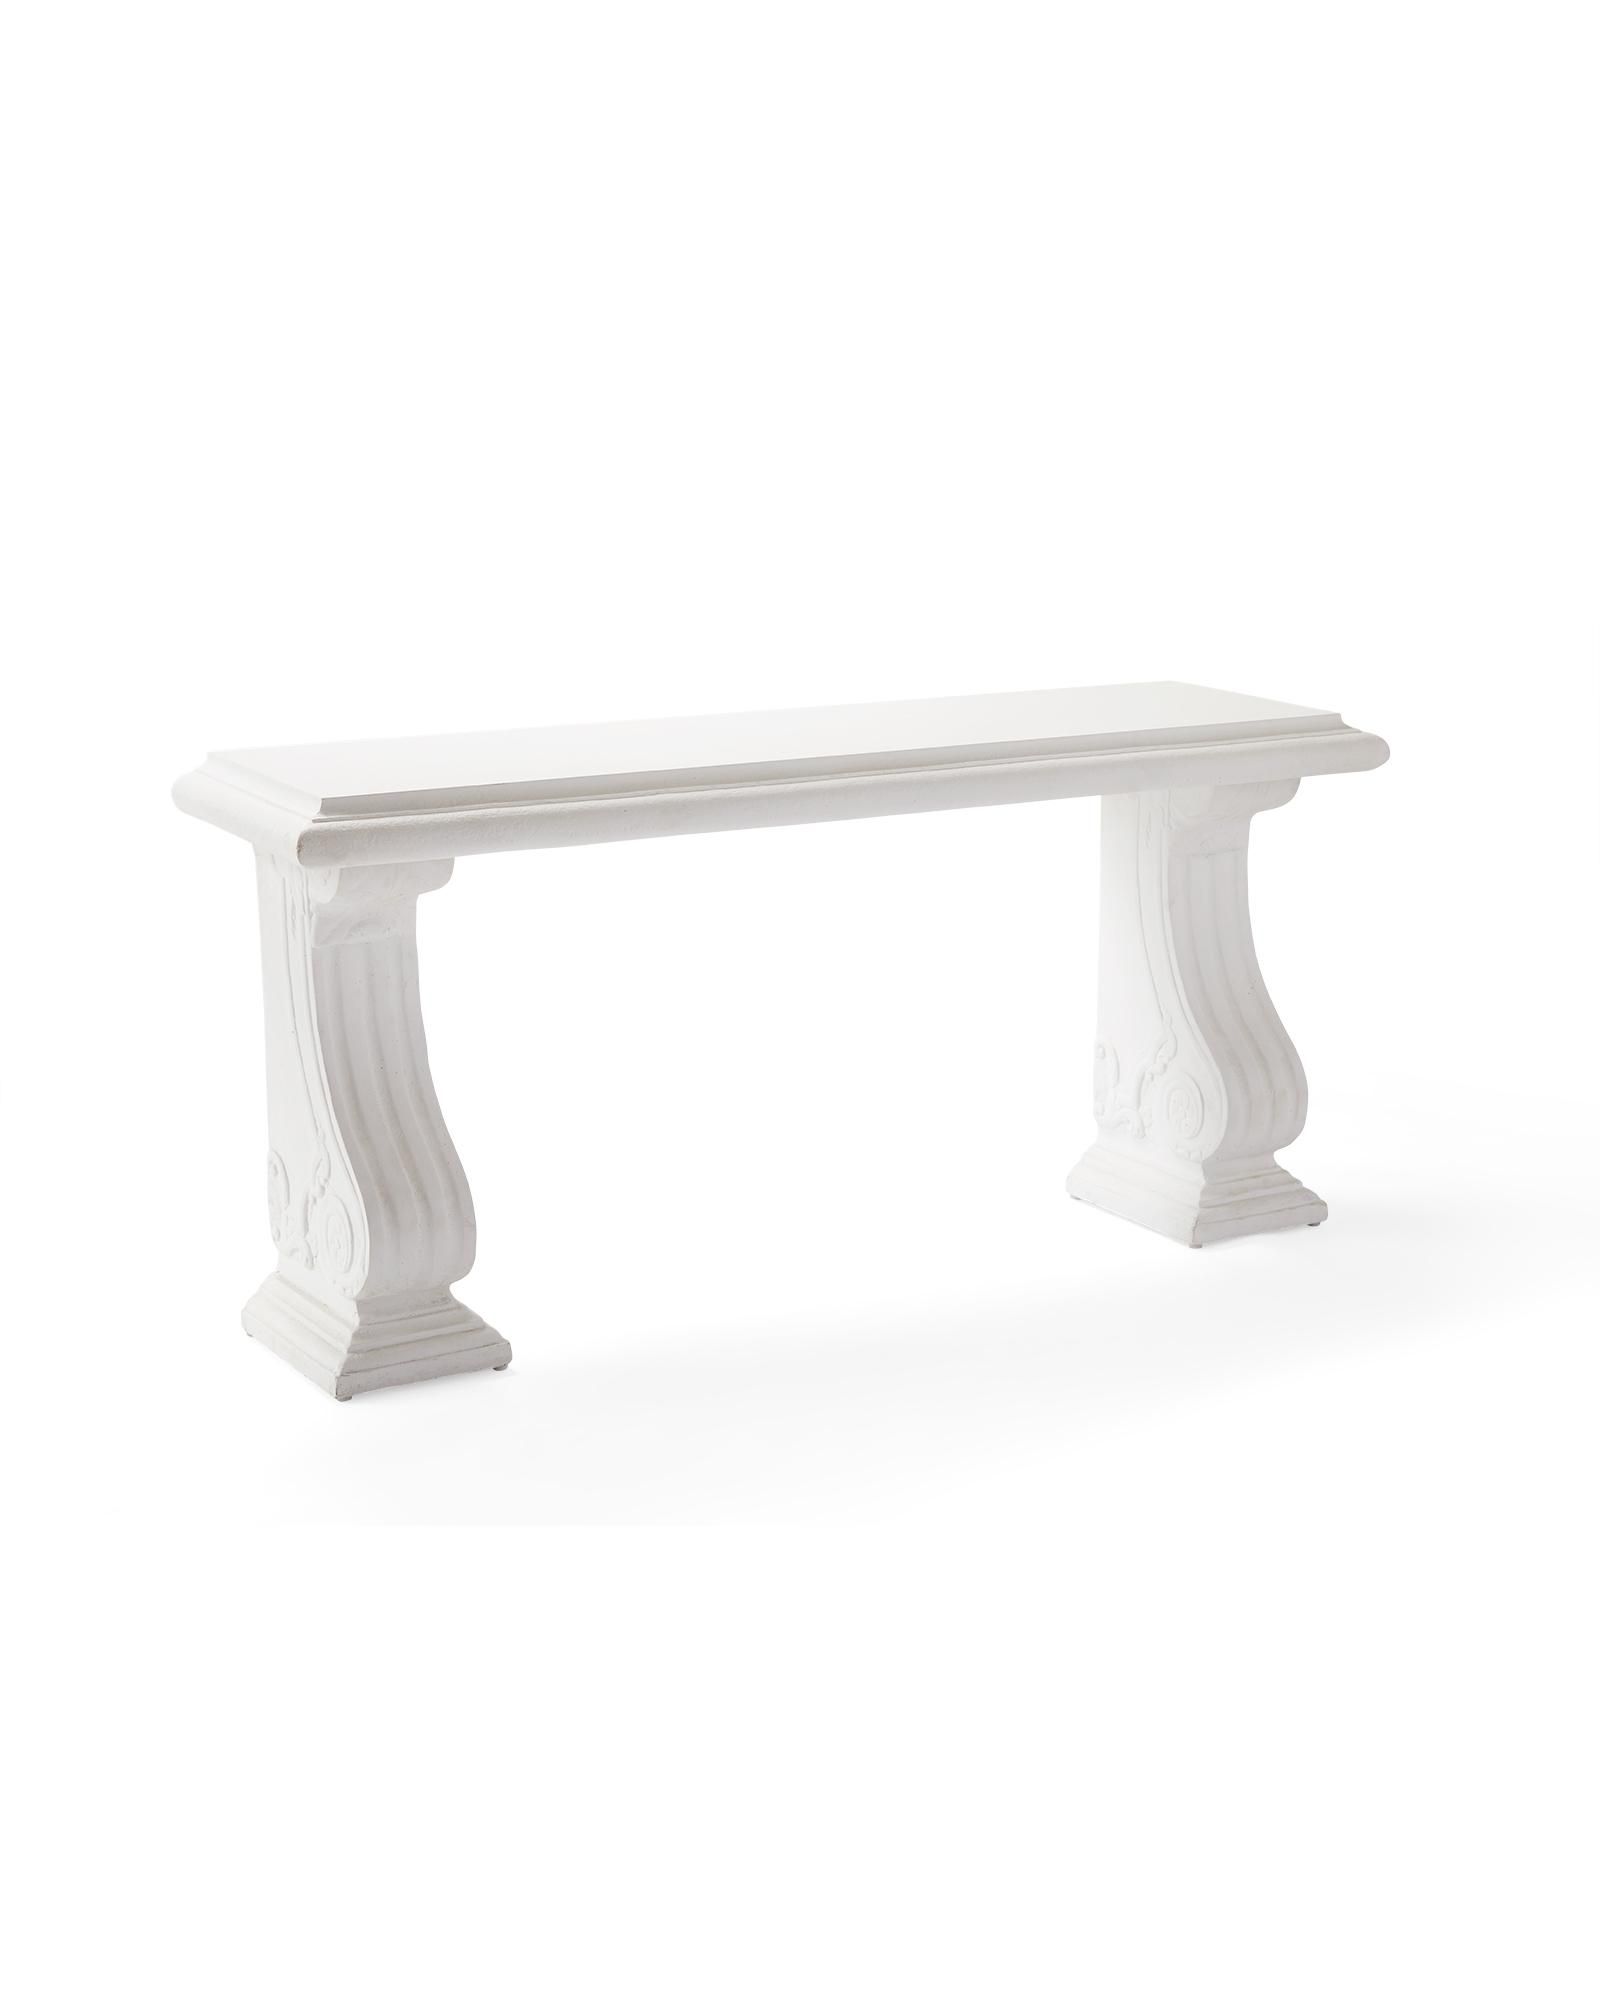 Acanthus Console | Serena and Lily